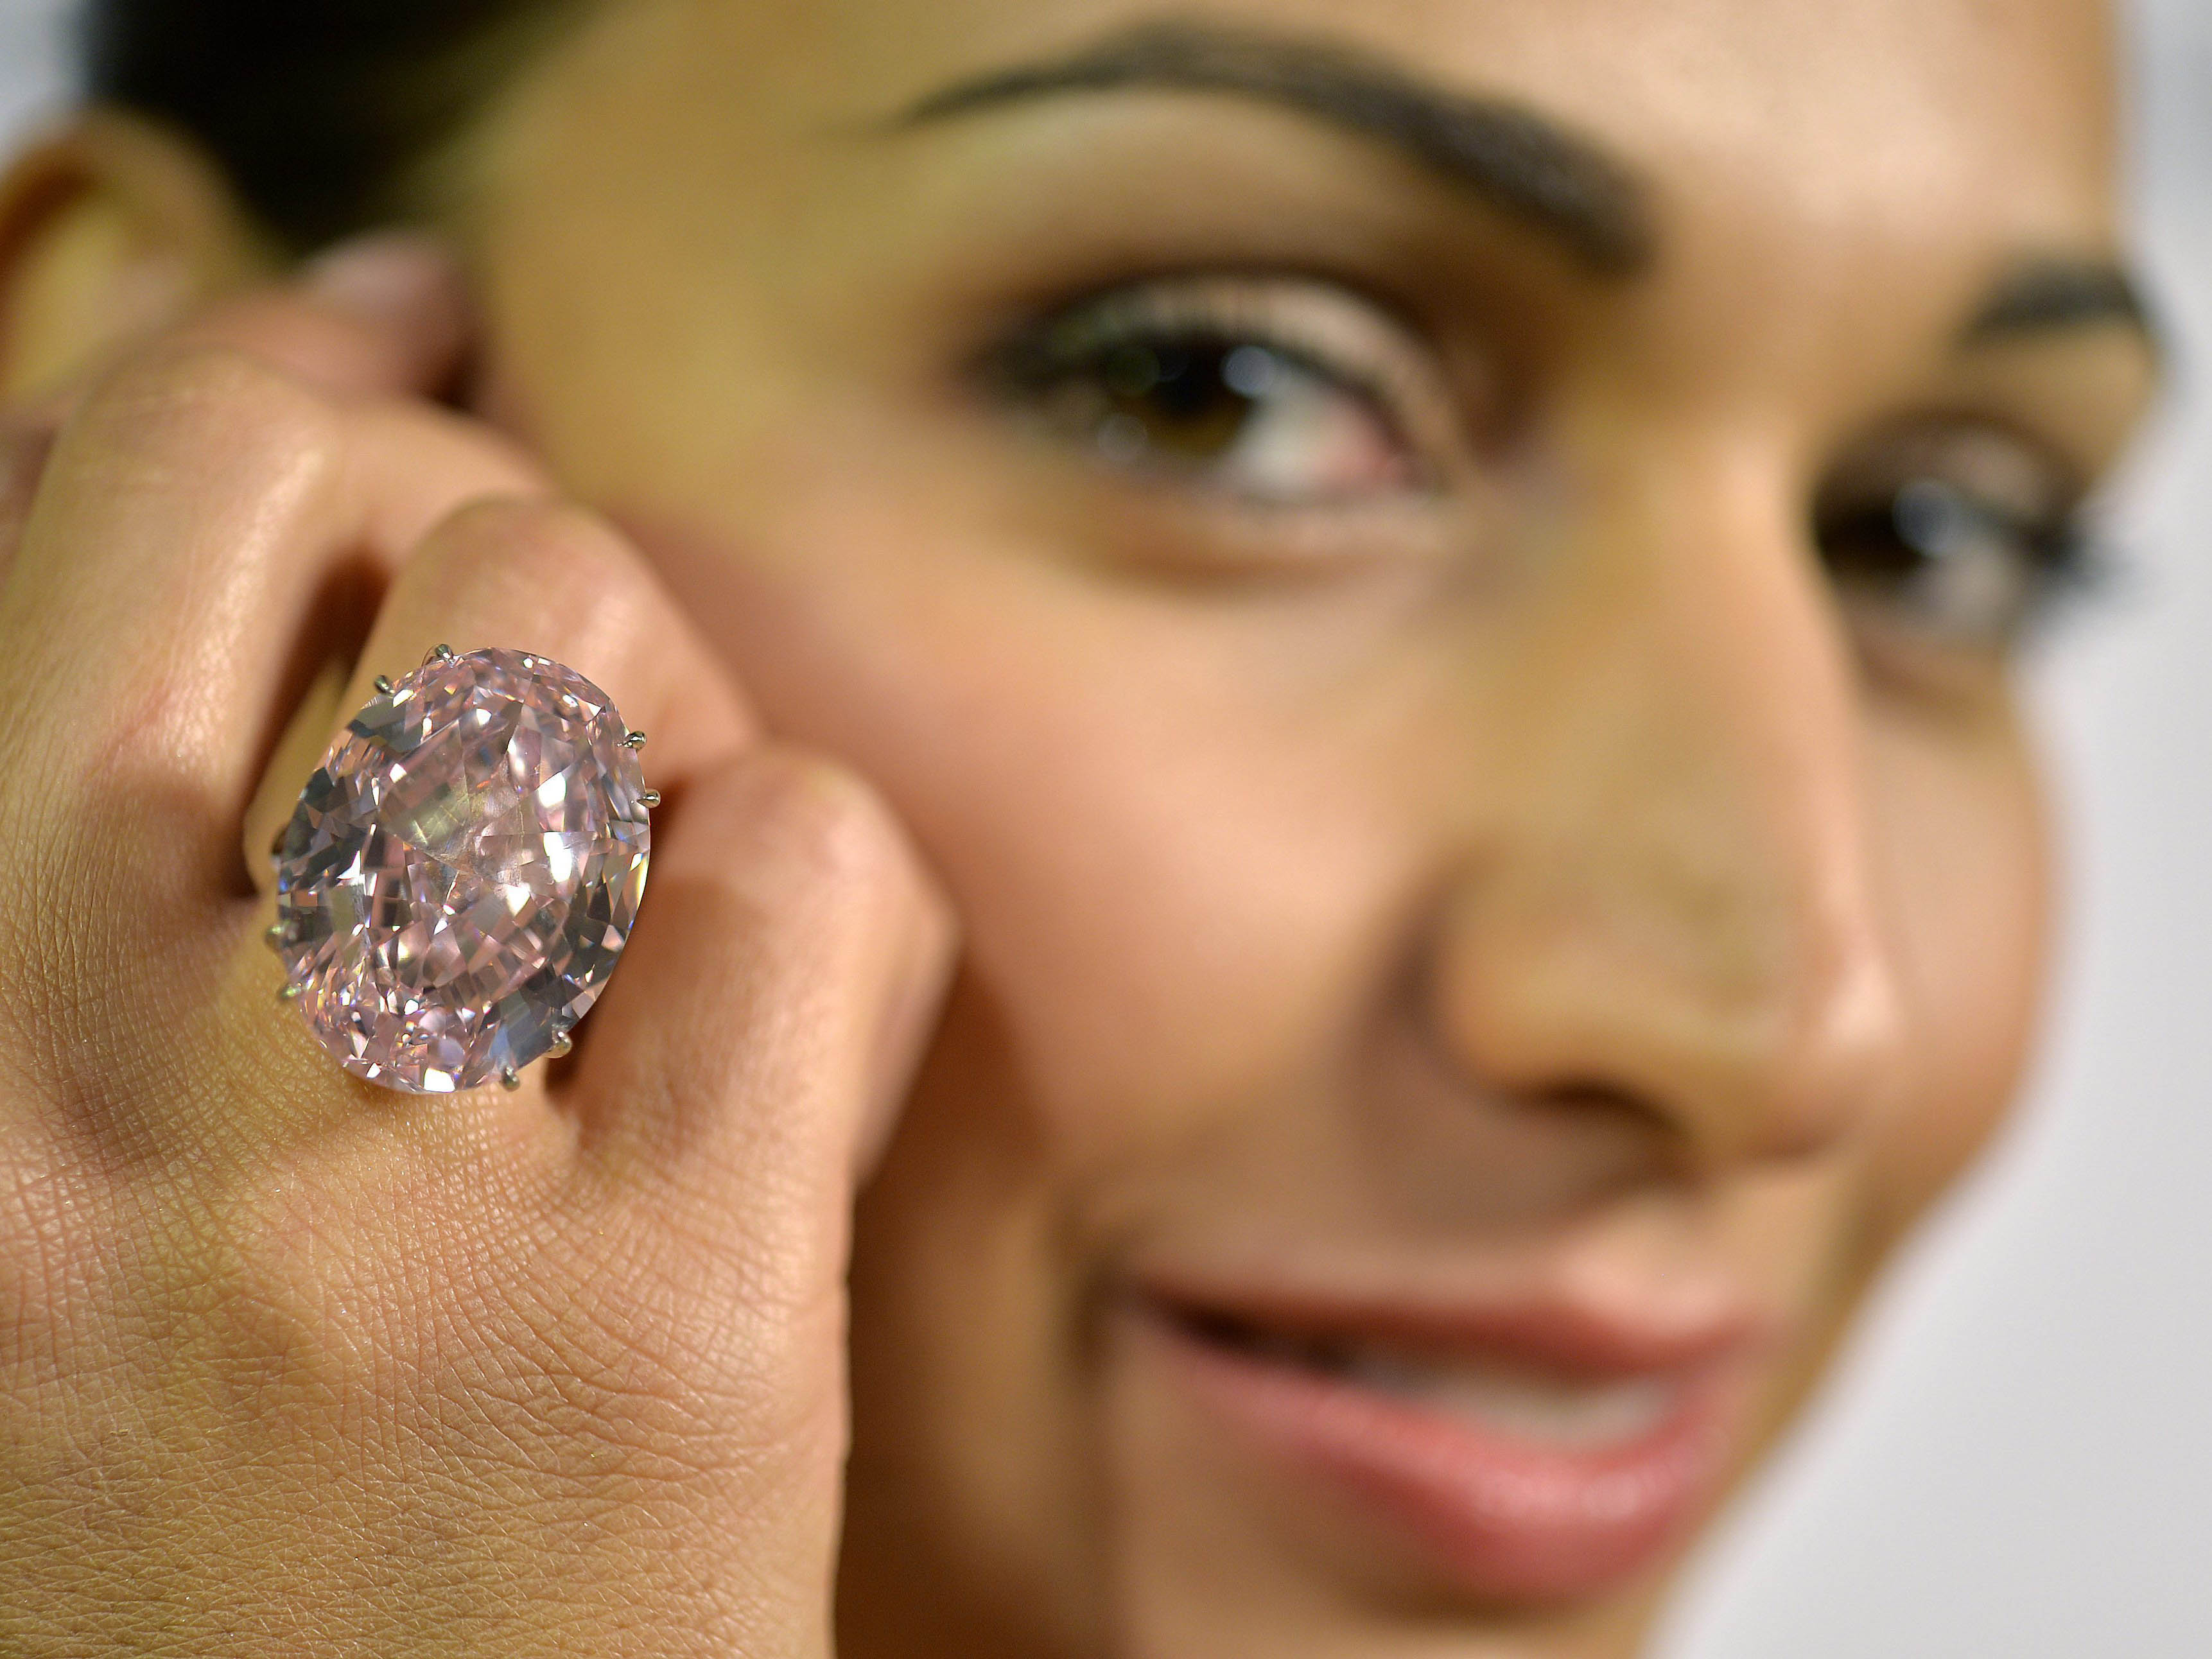 This Exceptionally Rare Pink Diamond Just Sold for $36.1 Million